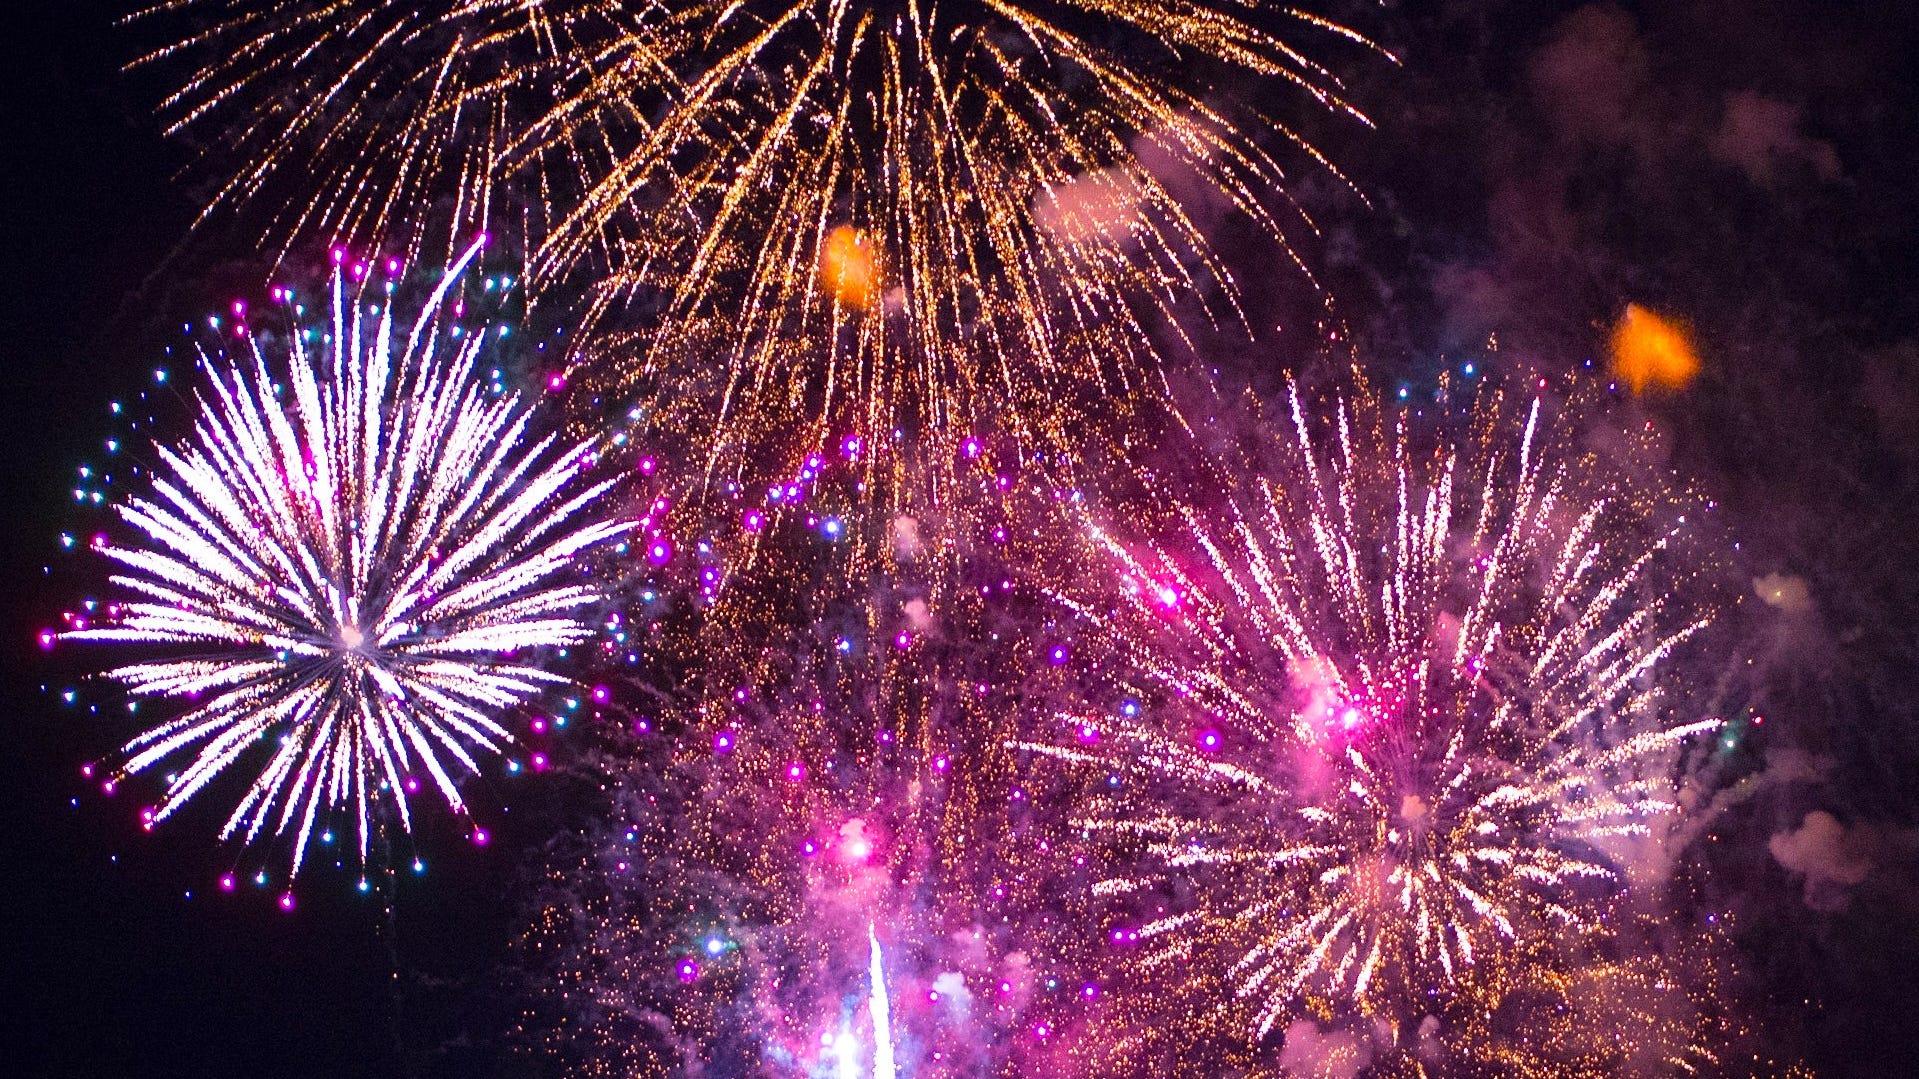 UPDATE Where to watch Fourth of July fireworks in the Redding area